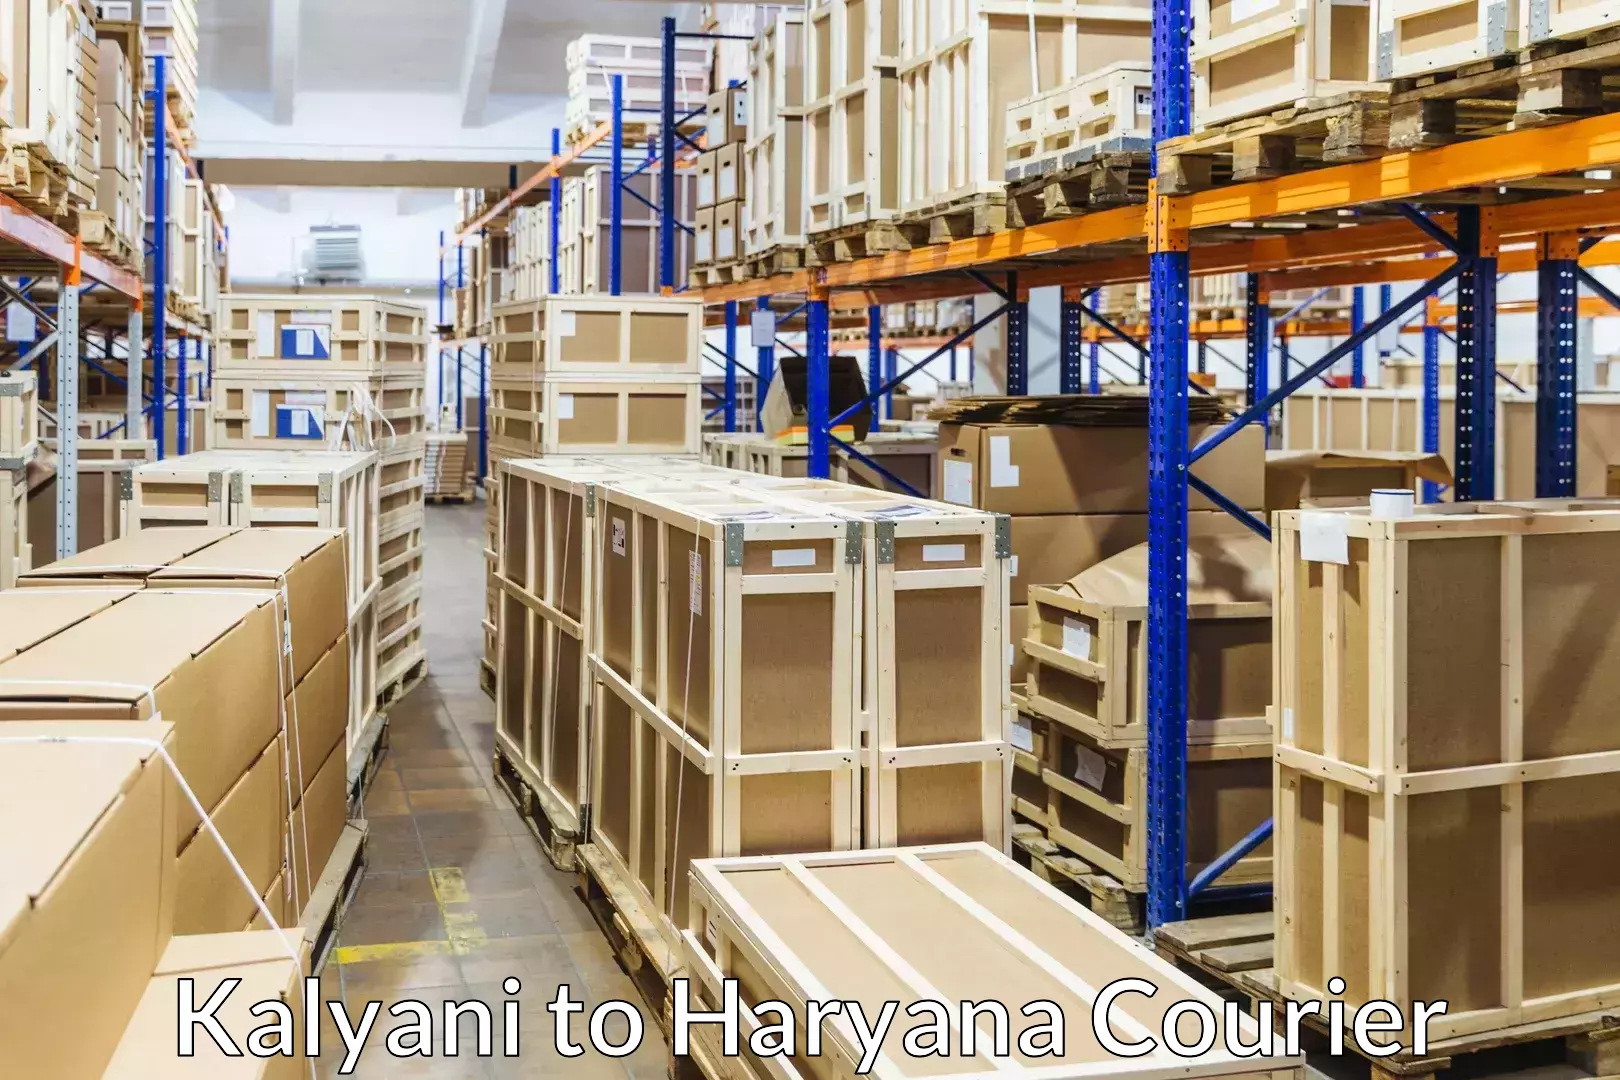 Home moving specialists Kalyani to Haryana